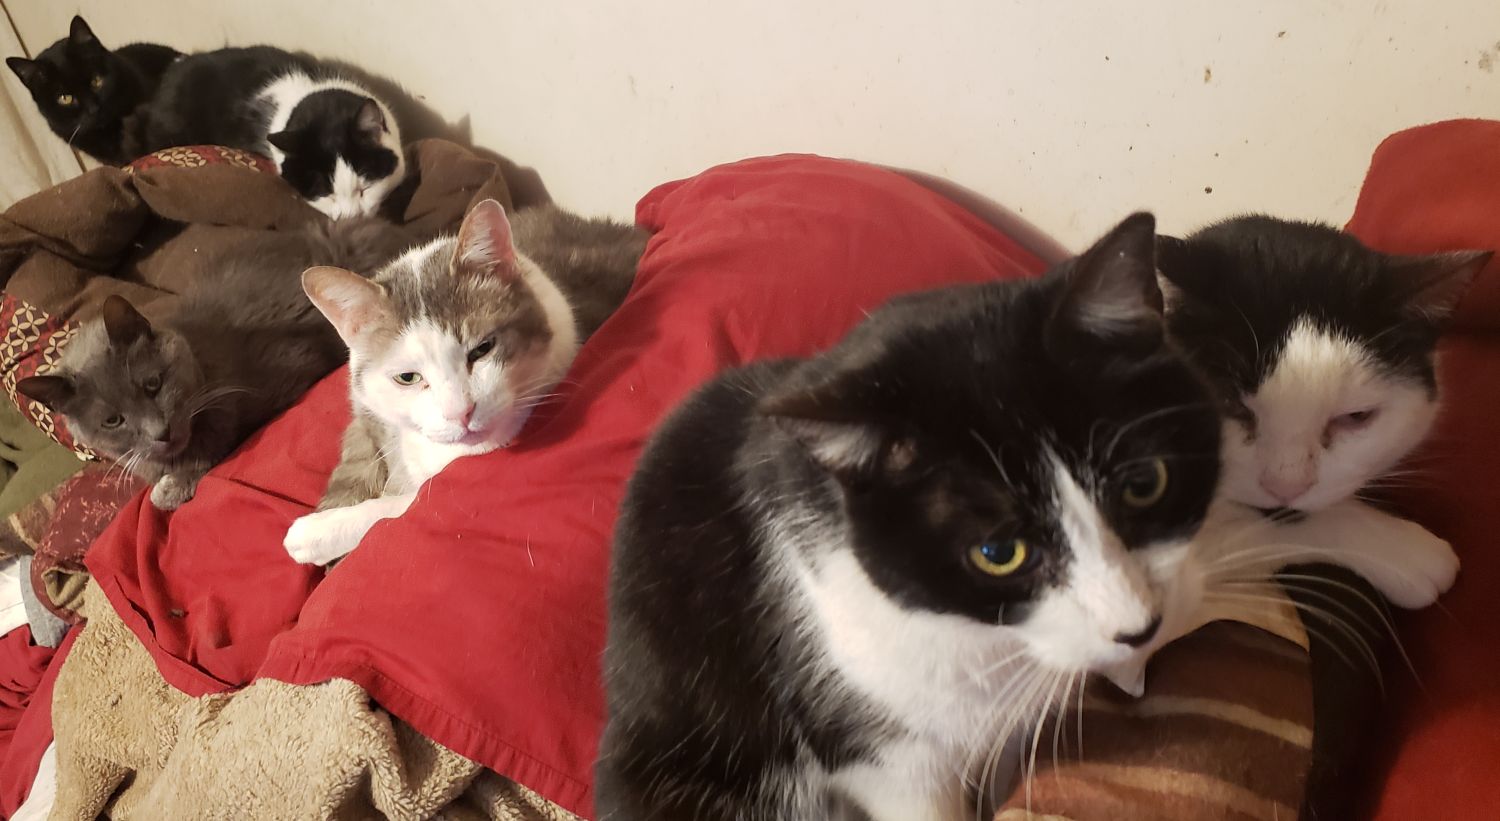 Part of my cat family relaxing in February 2020